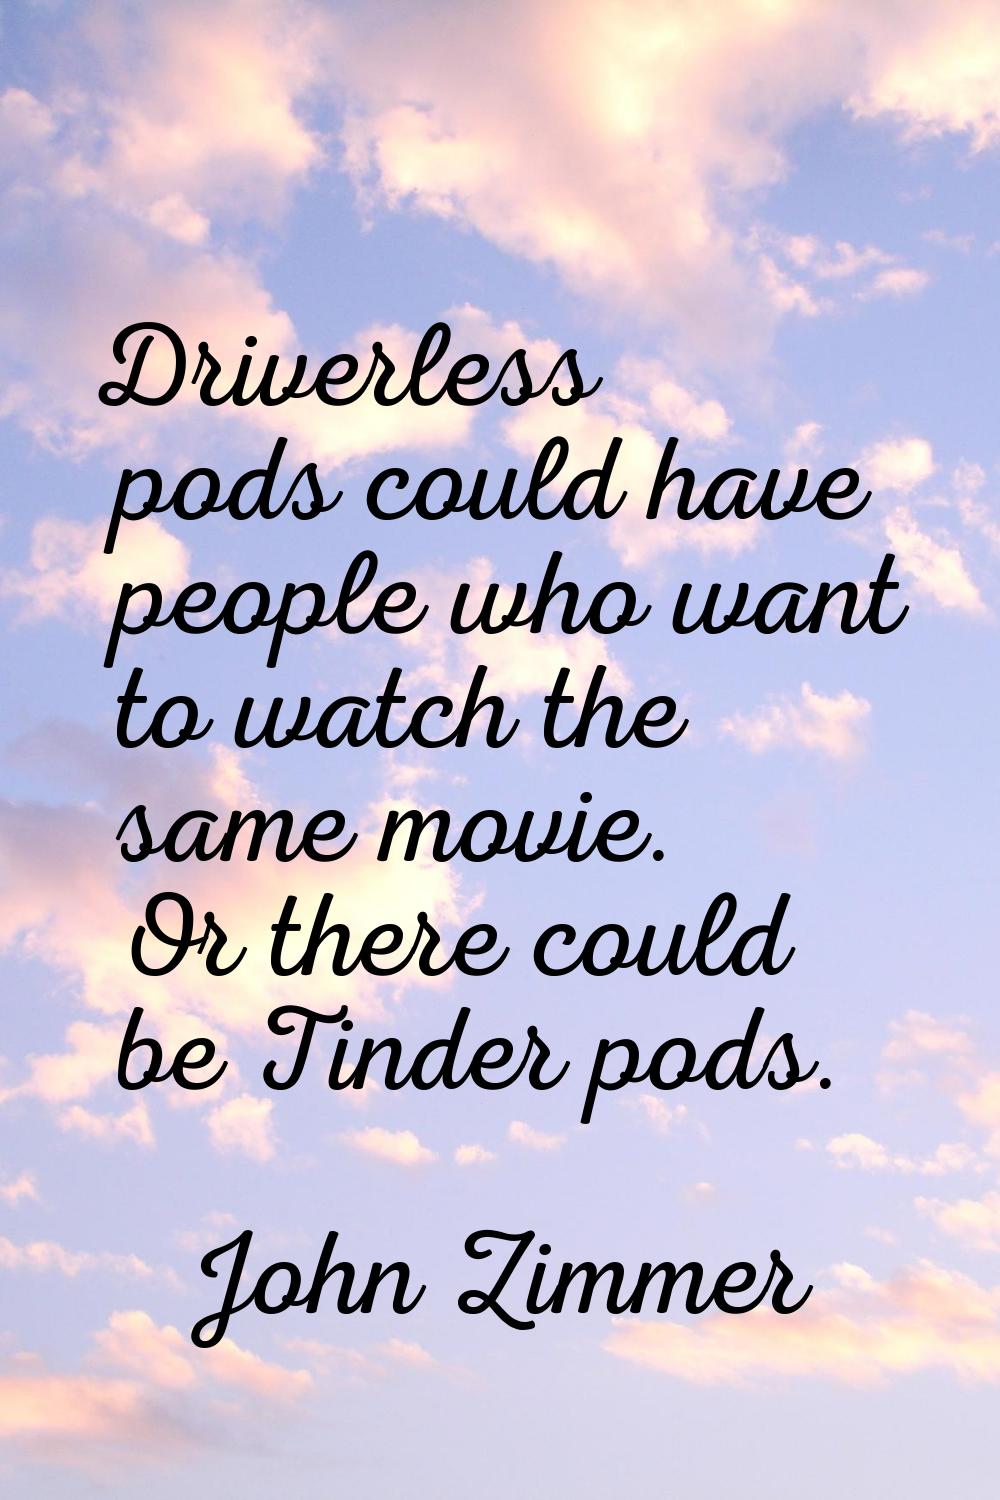 Driverless pods could have people who want to watch the same movie. Or there could be Tinder pods.